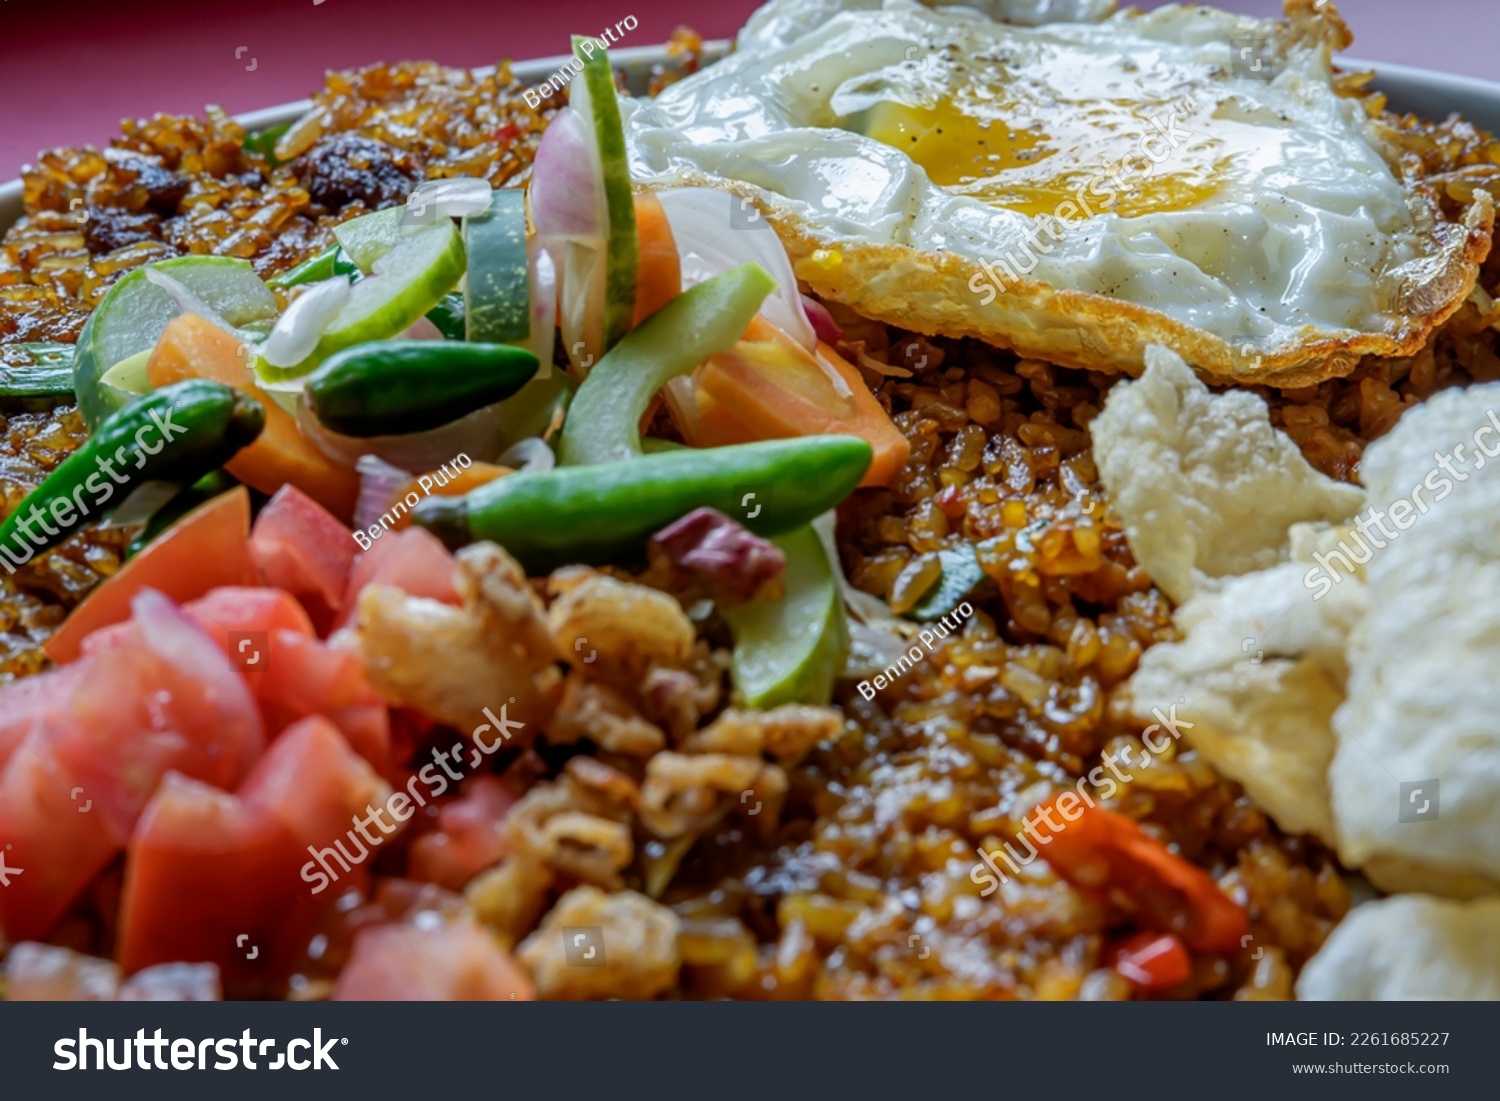 close up view of fried rice in a cafe, you can see some of the toppings that complement the menu such as eggs, chips and vegetables #2261685227